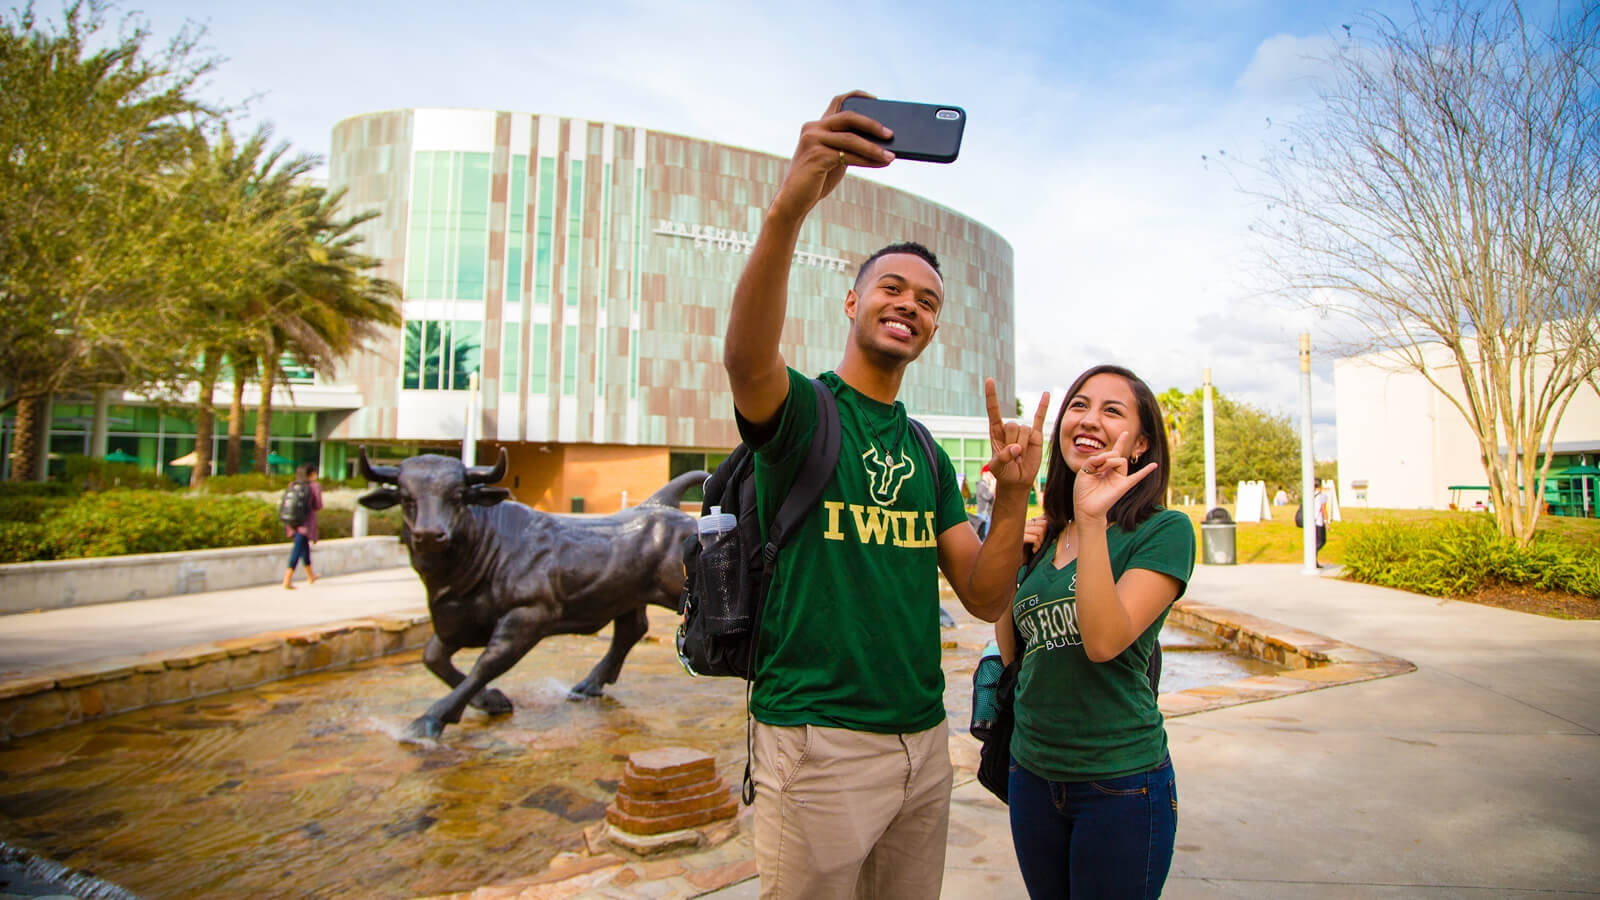 "Exciting University Life at the University of South Florida" Wallpaper